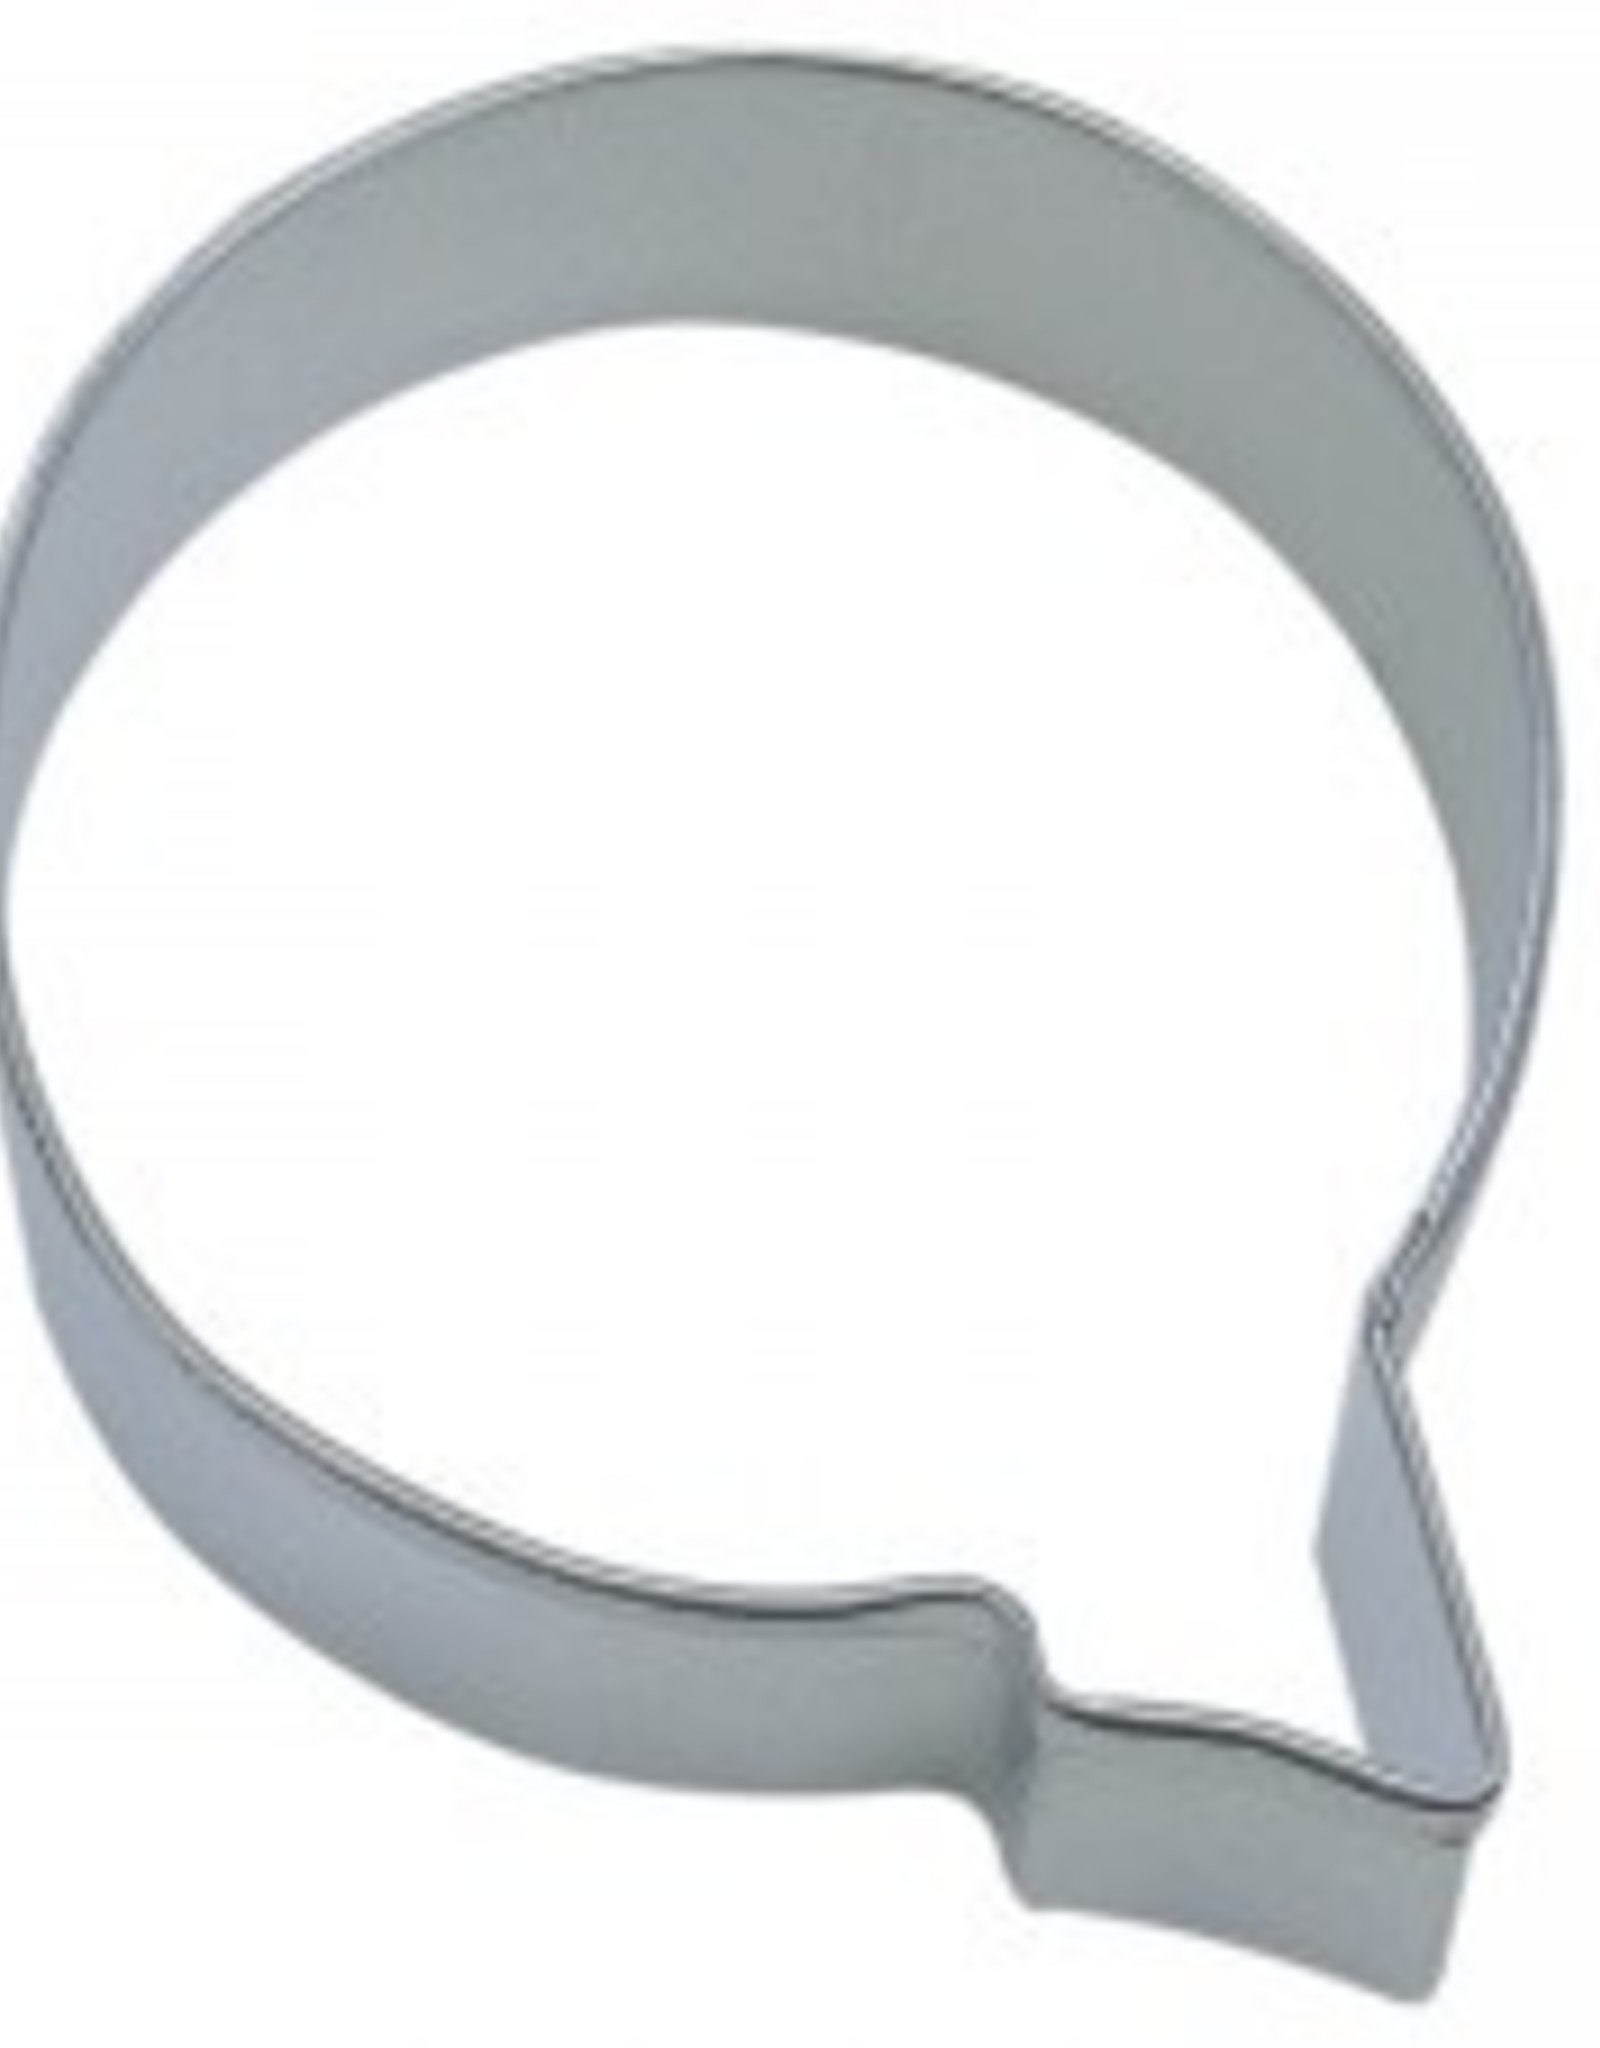 Letter "Q" Cookie Cutter